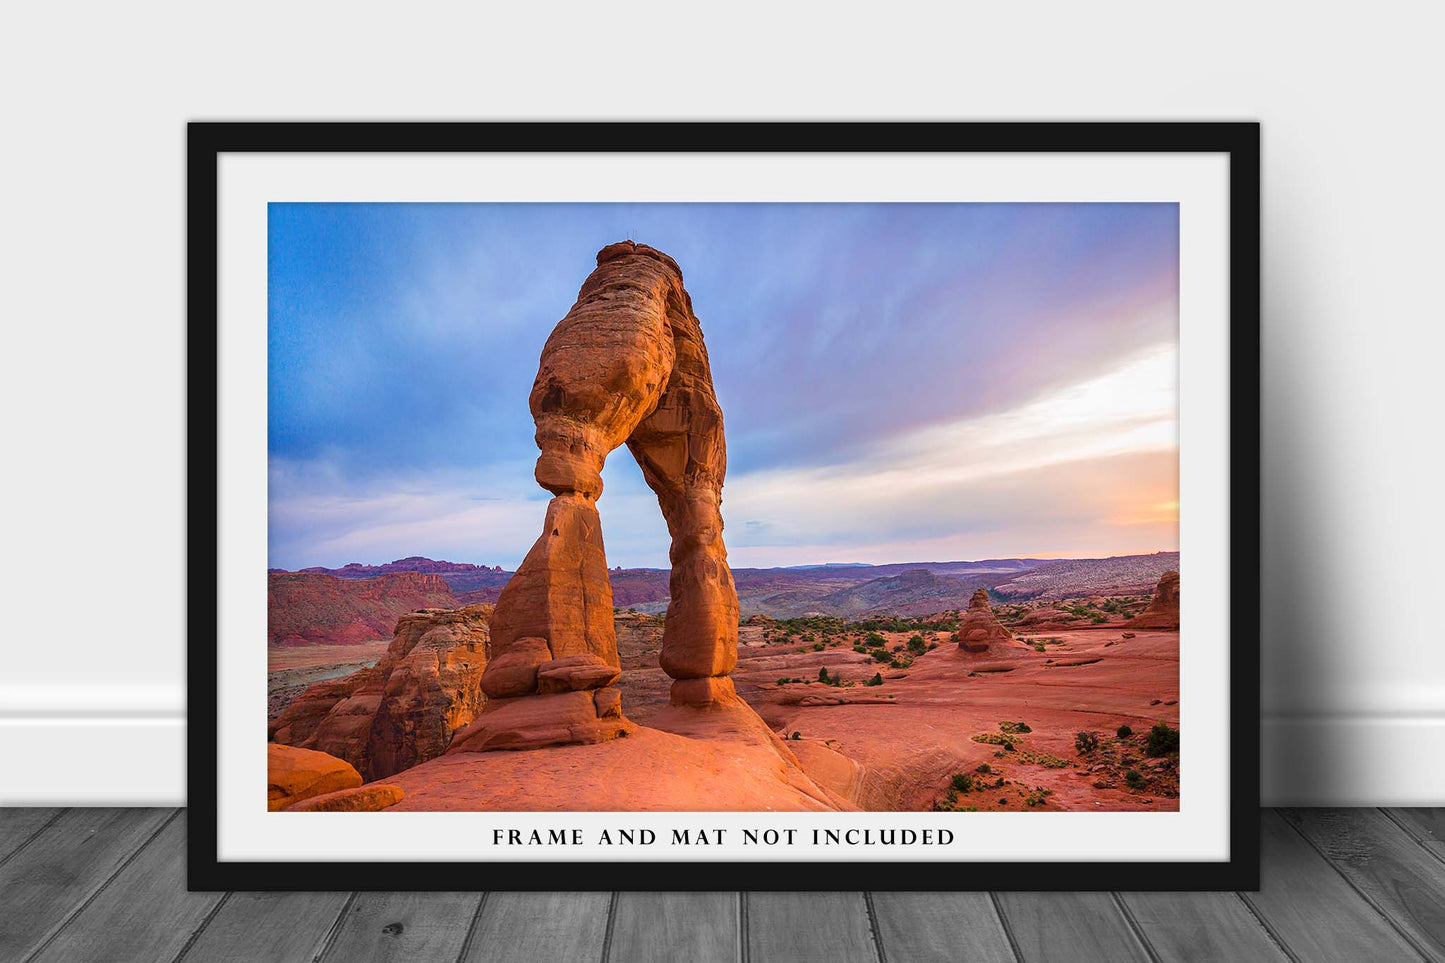 Southwest Photography Print - Picture of Delicate Arch in Arches National Park Utah Desert Landscape Home Decor Wall Art Photo Artwork